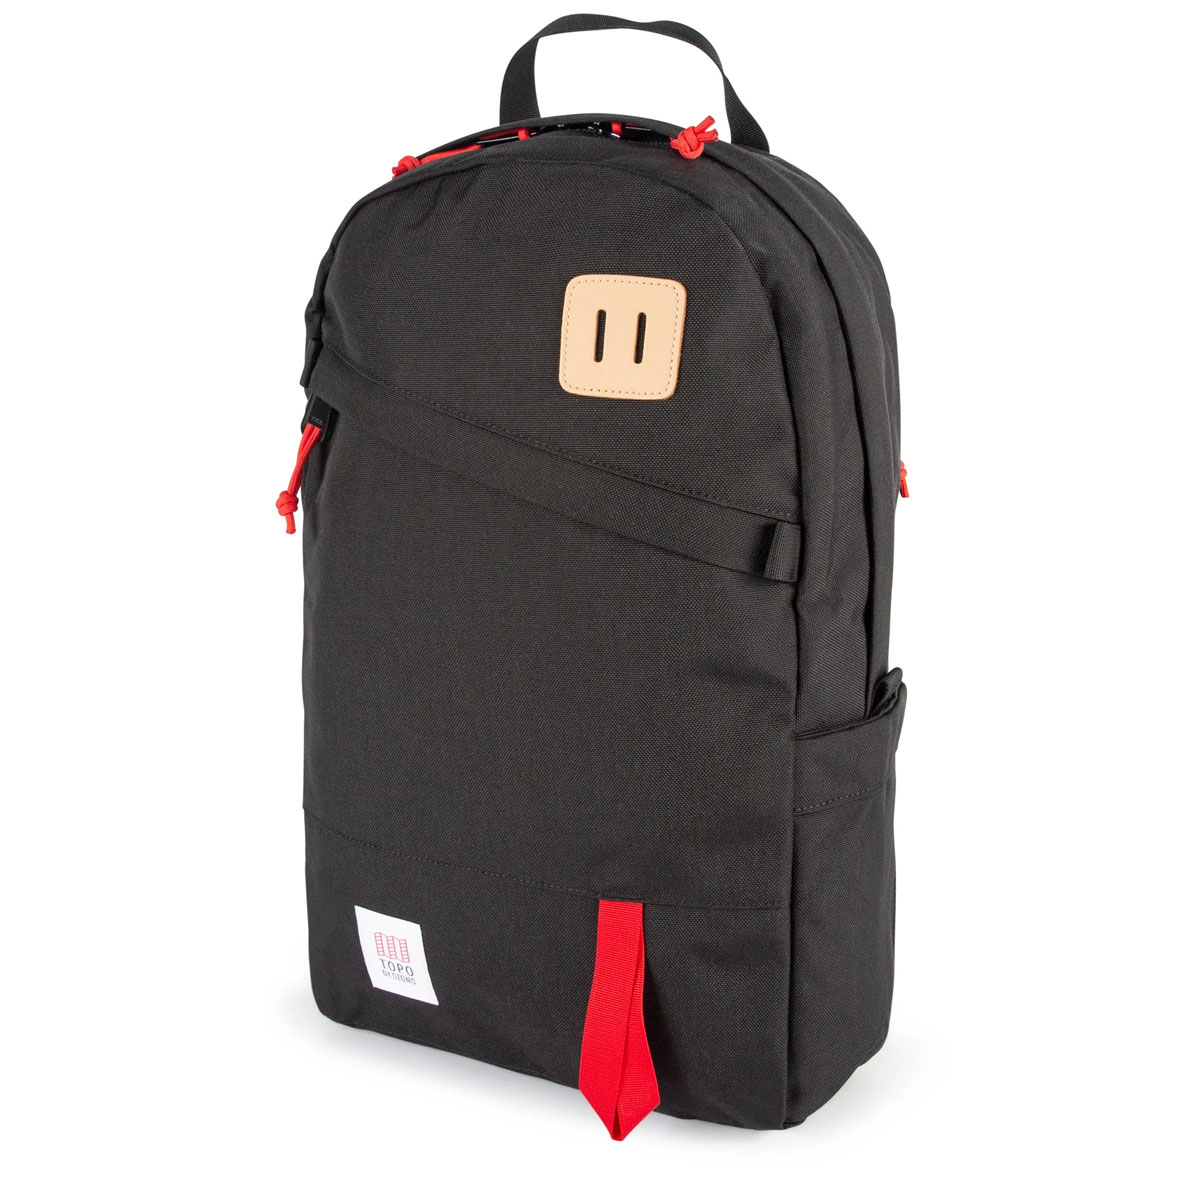 Topo Designs Daypack Classic Black, strong backpack for every day